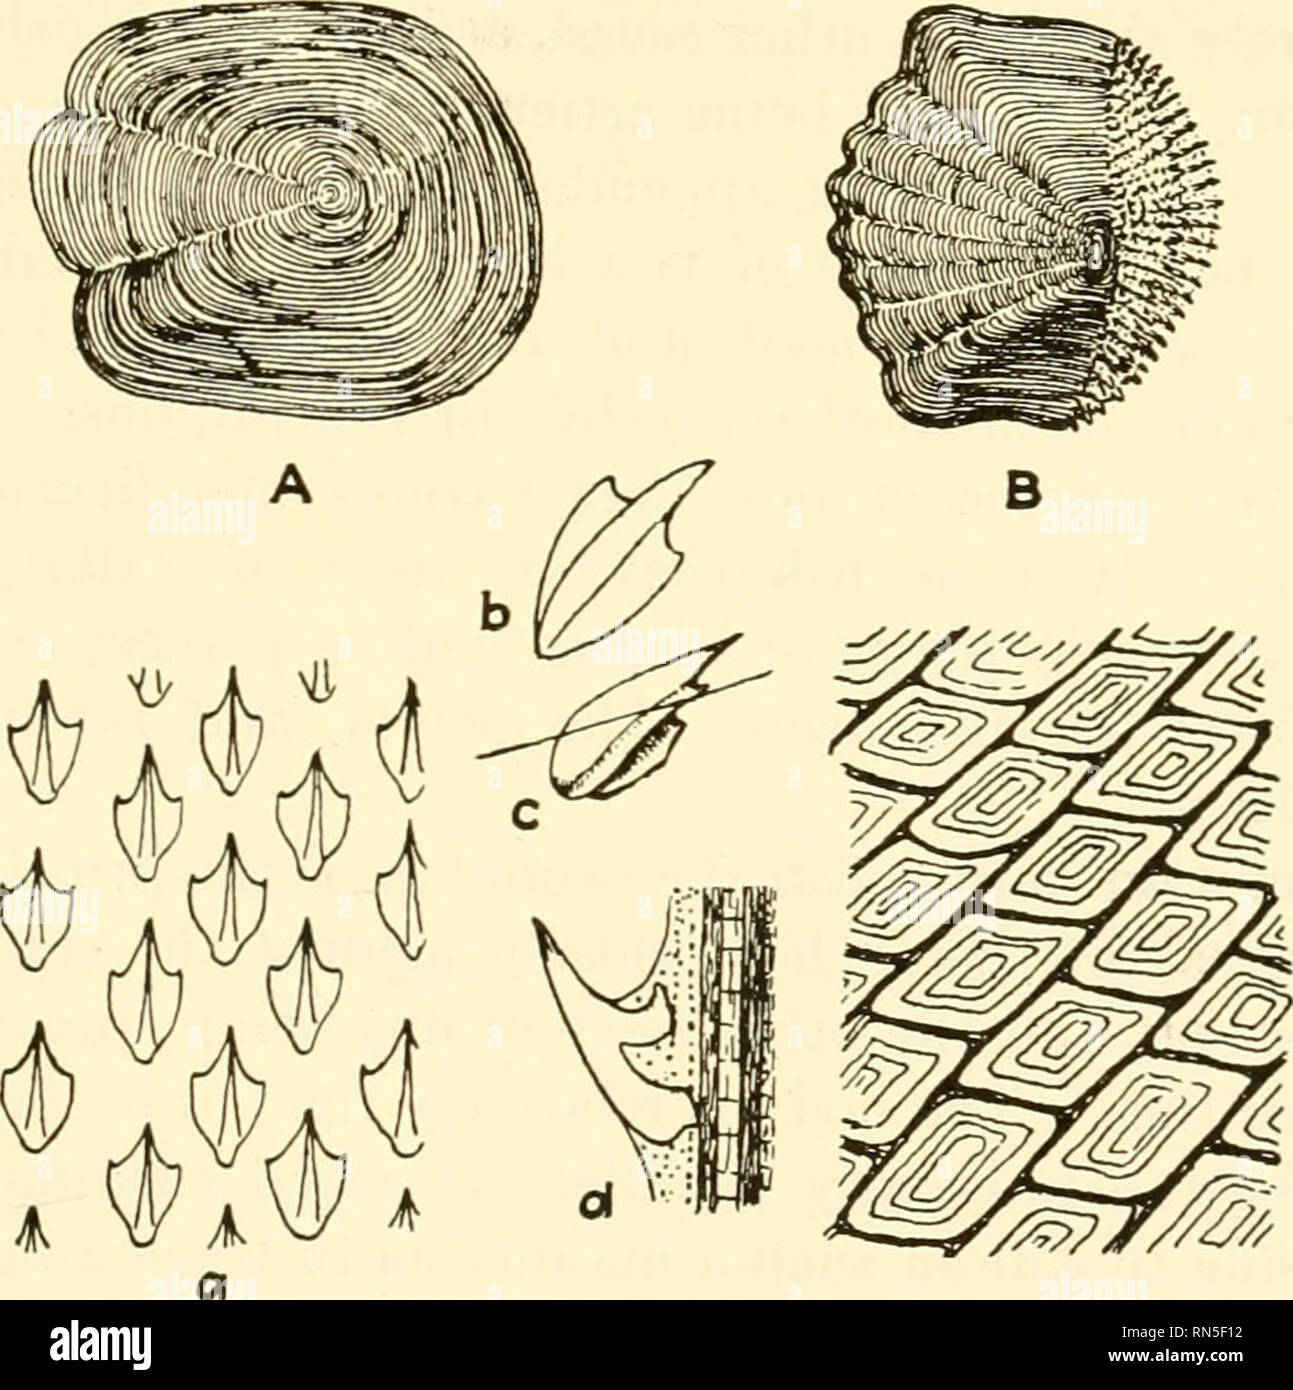 . Animal biology. Zoology; Biology. Fig. 249.—African lungfish, Protopterus annectens Owen. X M- {From Packard, &quot;Zoology,&quot; after Boas, by the courtesy of Henry Holt &amp; Company.) the water with the least amount of retardation from resistance in front, friction laterally, or suction behind. The fins, being thin in the plane of movement, offer little interference.. C D Fig. 250.—Scales of fishes. A, cycloid scale of northern pike, Esox Indus Linnaeus. X 8. B, ctenoid scale of common perch, Perca flavescens (Mitchill). X 9. C, placoid scales of dogfish shark, Squalus acanthias Linnaeu Stock Photo